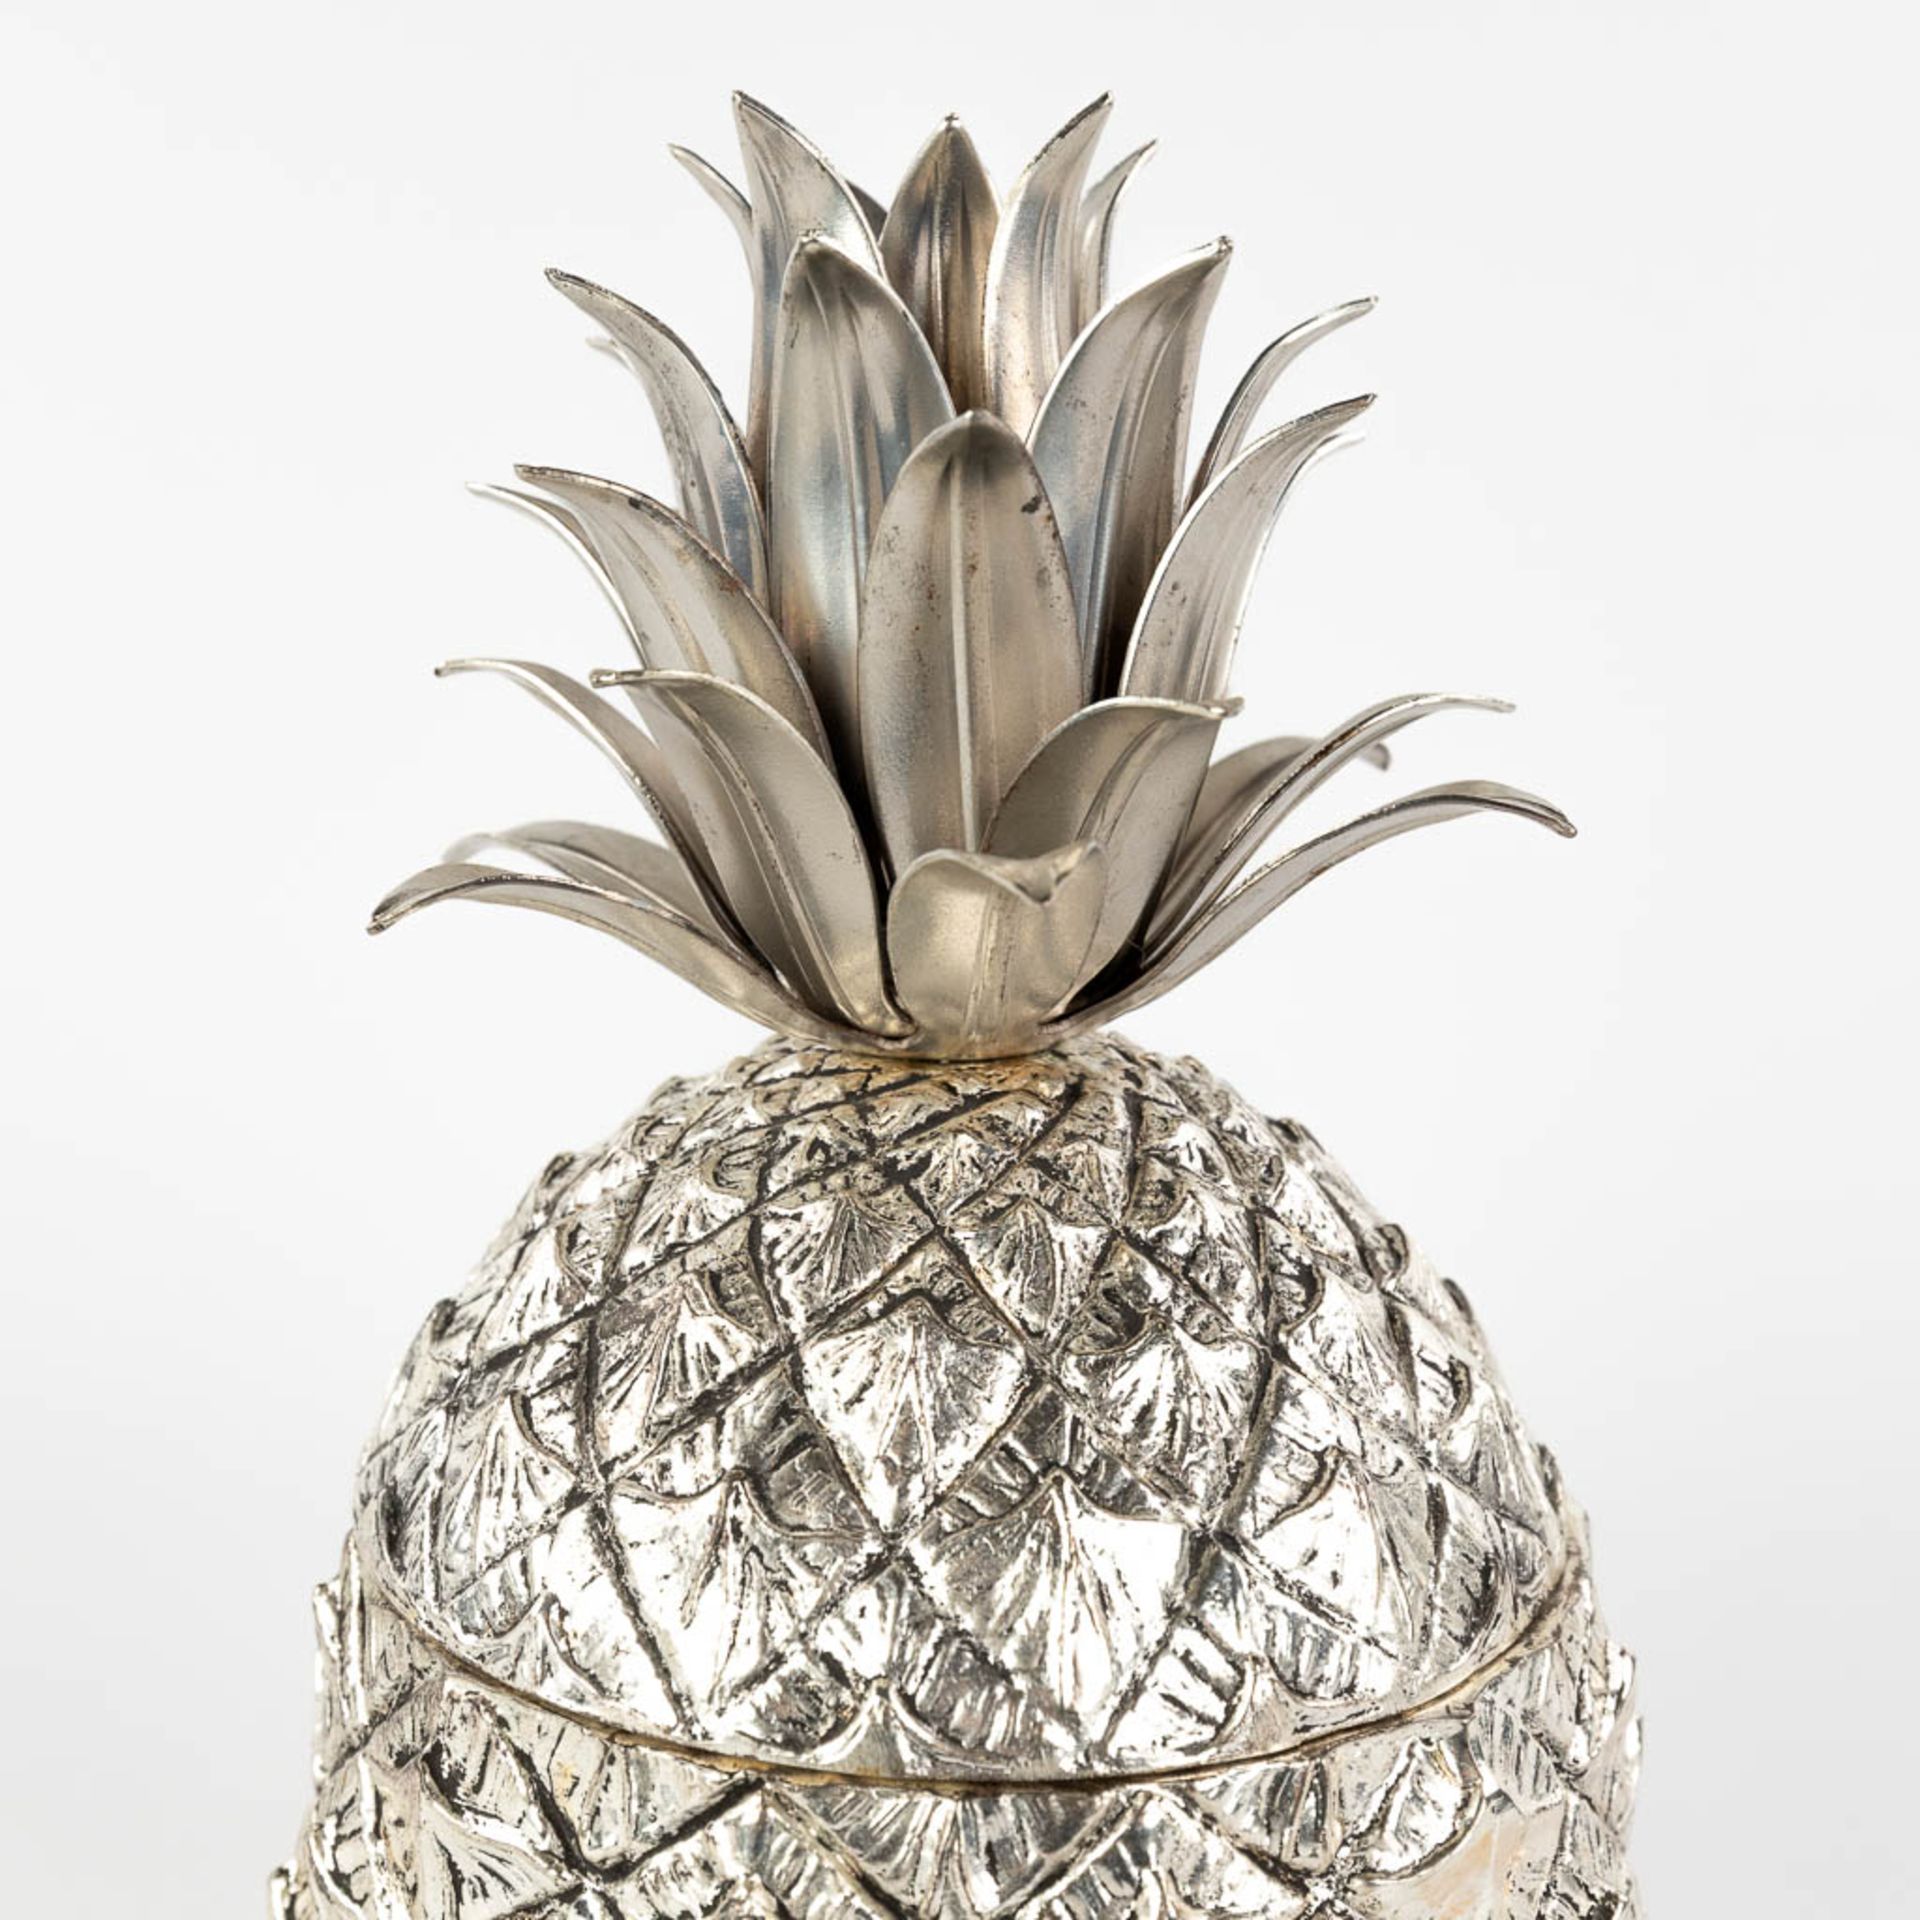 Mauro MANETTI (1946) 'Pineapple' an ice pail. (H:27 x D:13 cm) - Image 6 of 10